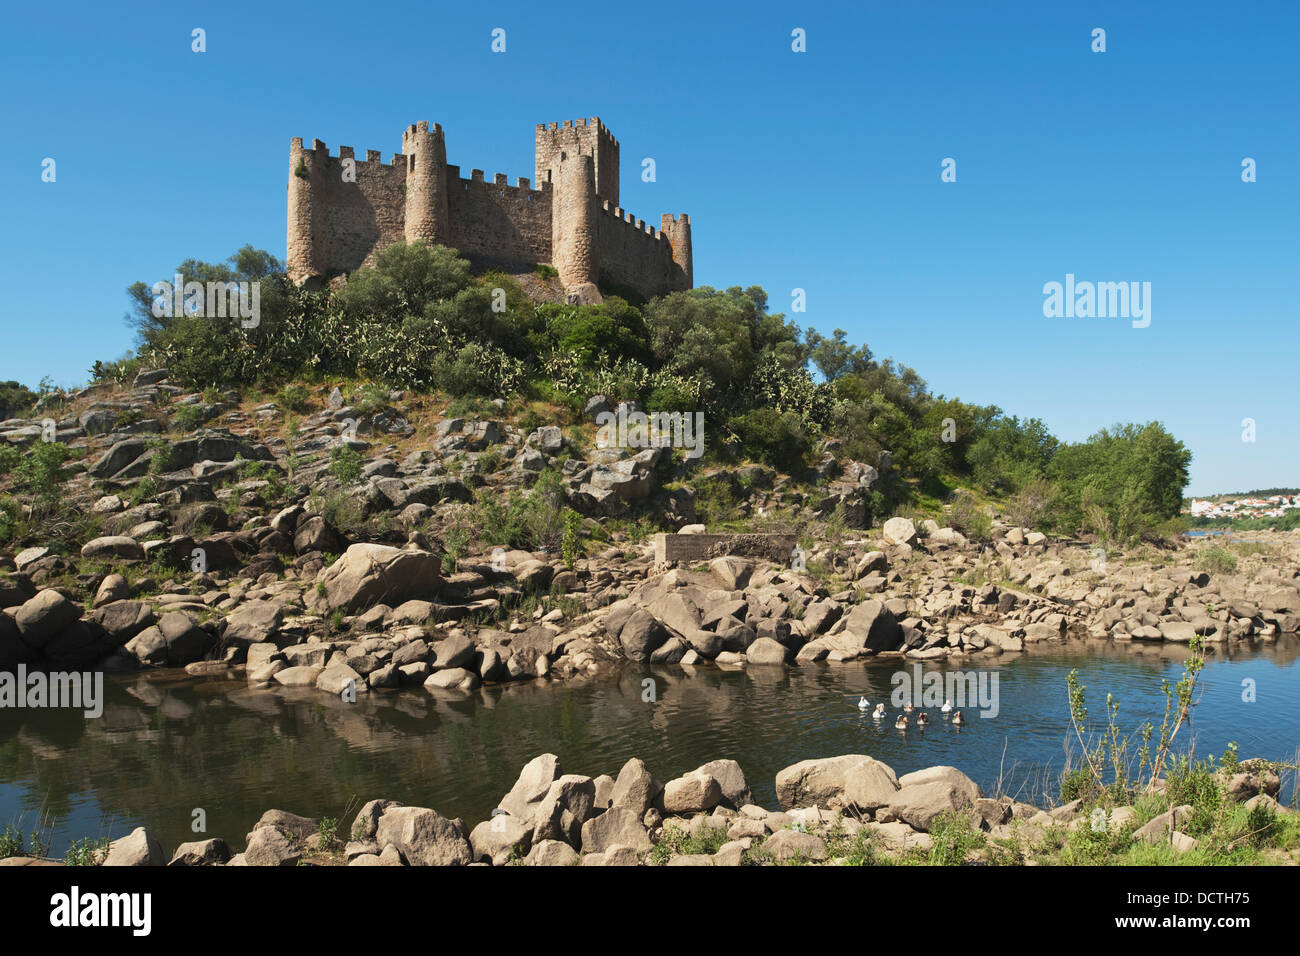 Castelo De Almourol Standing In The Middle Of The River Tejo, Constructed In 1171 By The Knights Templar; Portugal Stock Photo